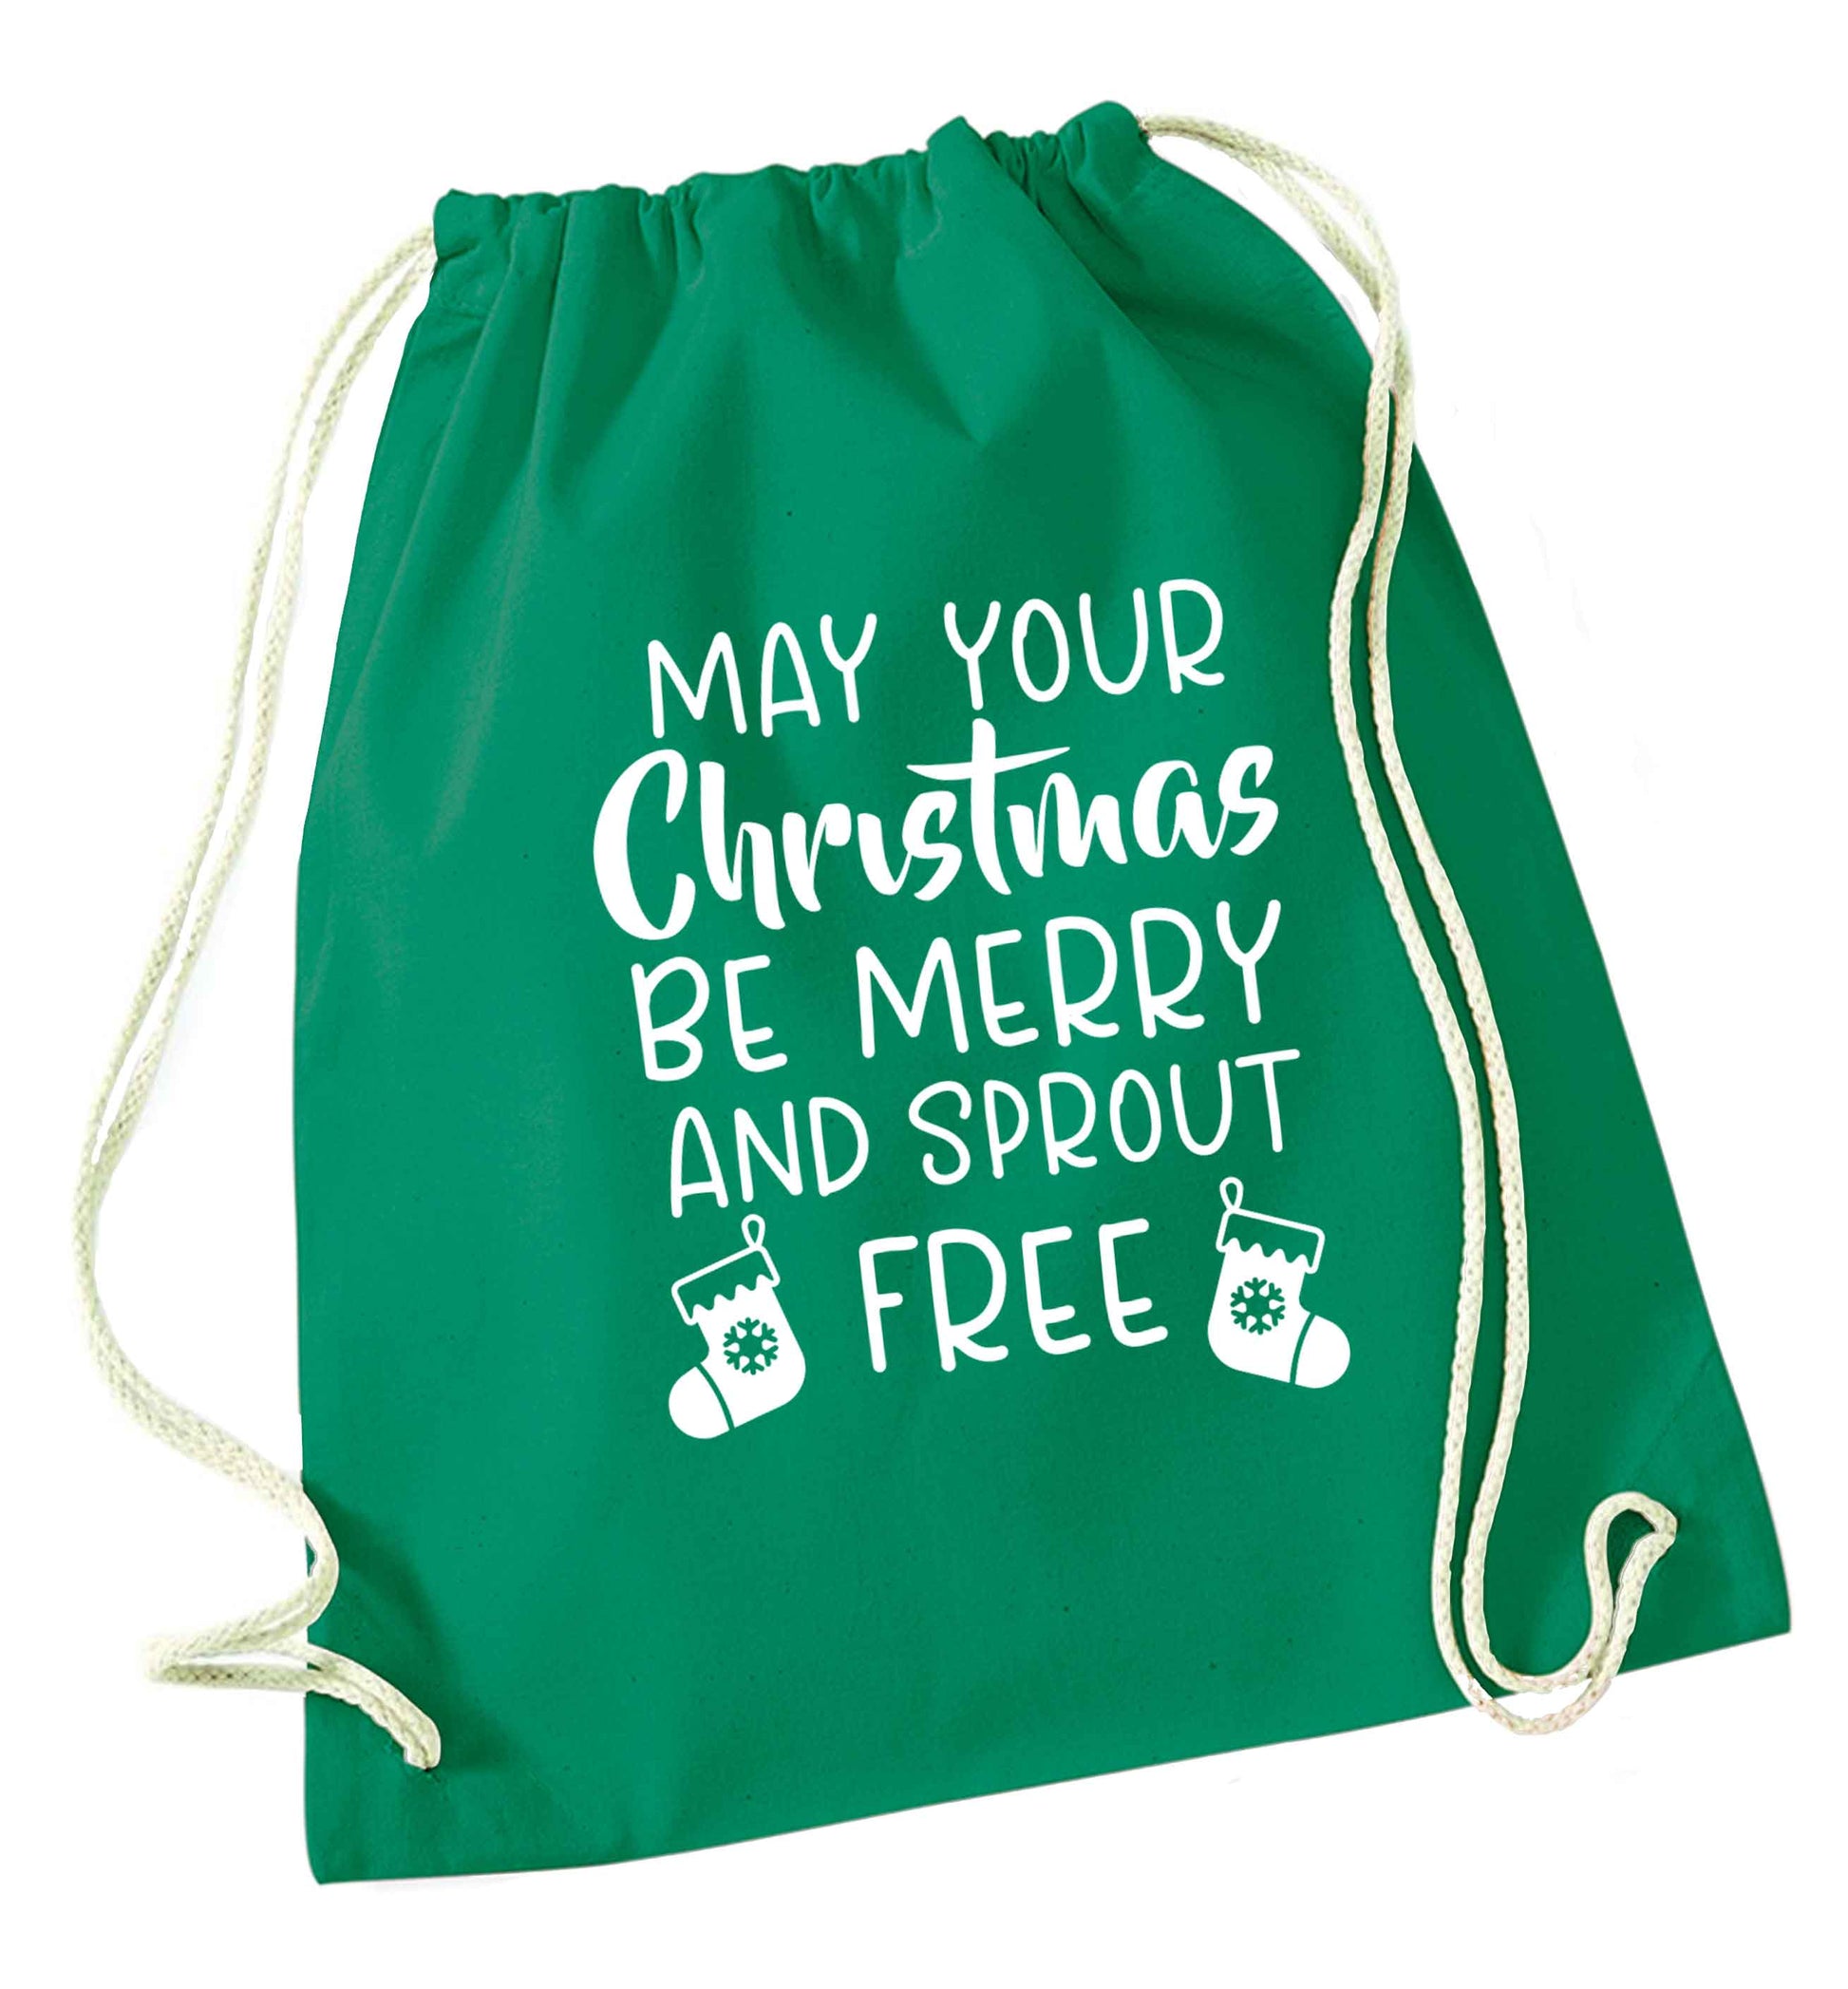 May your Christmas be merry and sprout free green drawstring bag